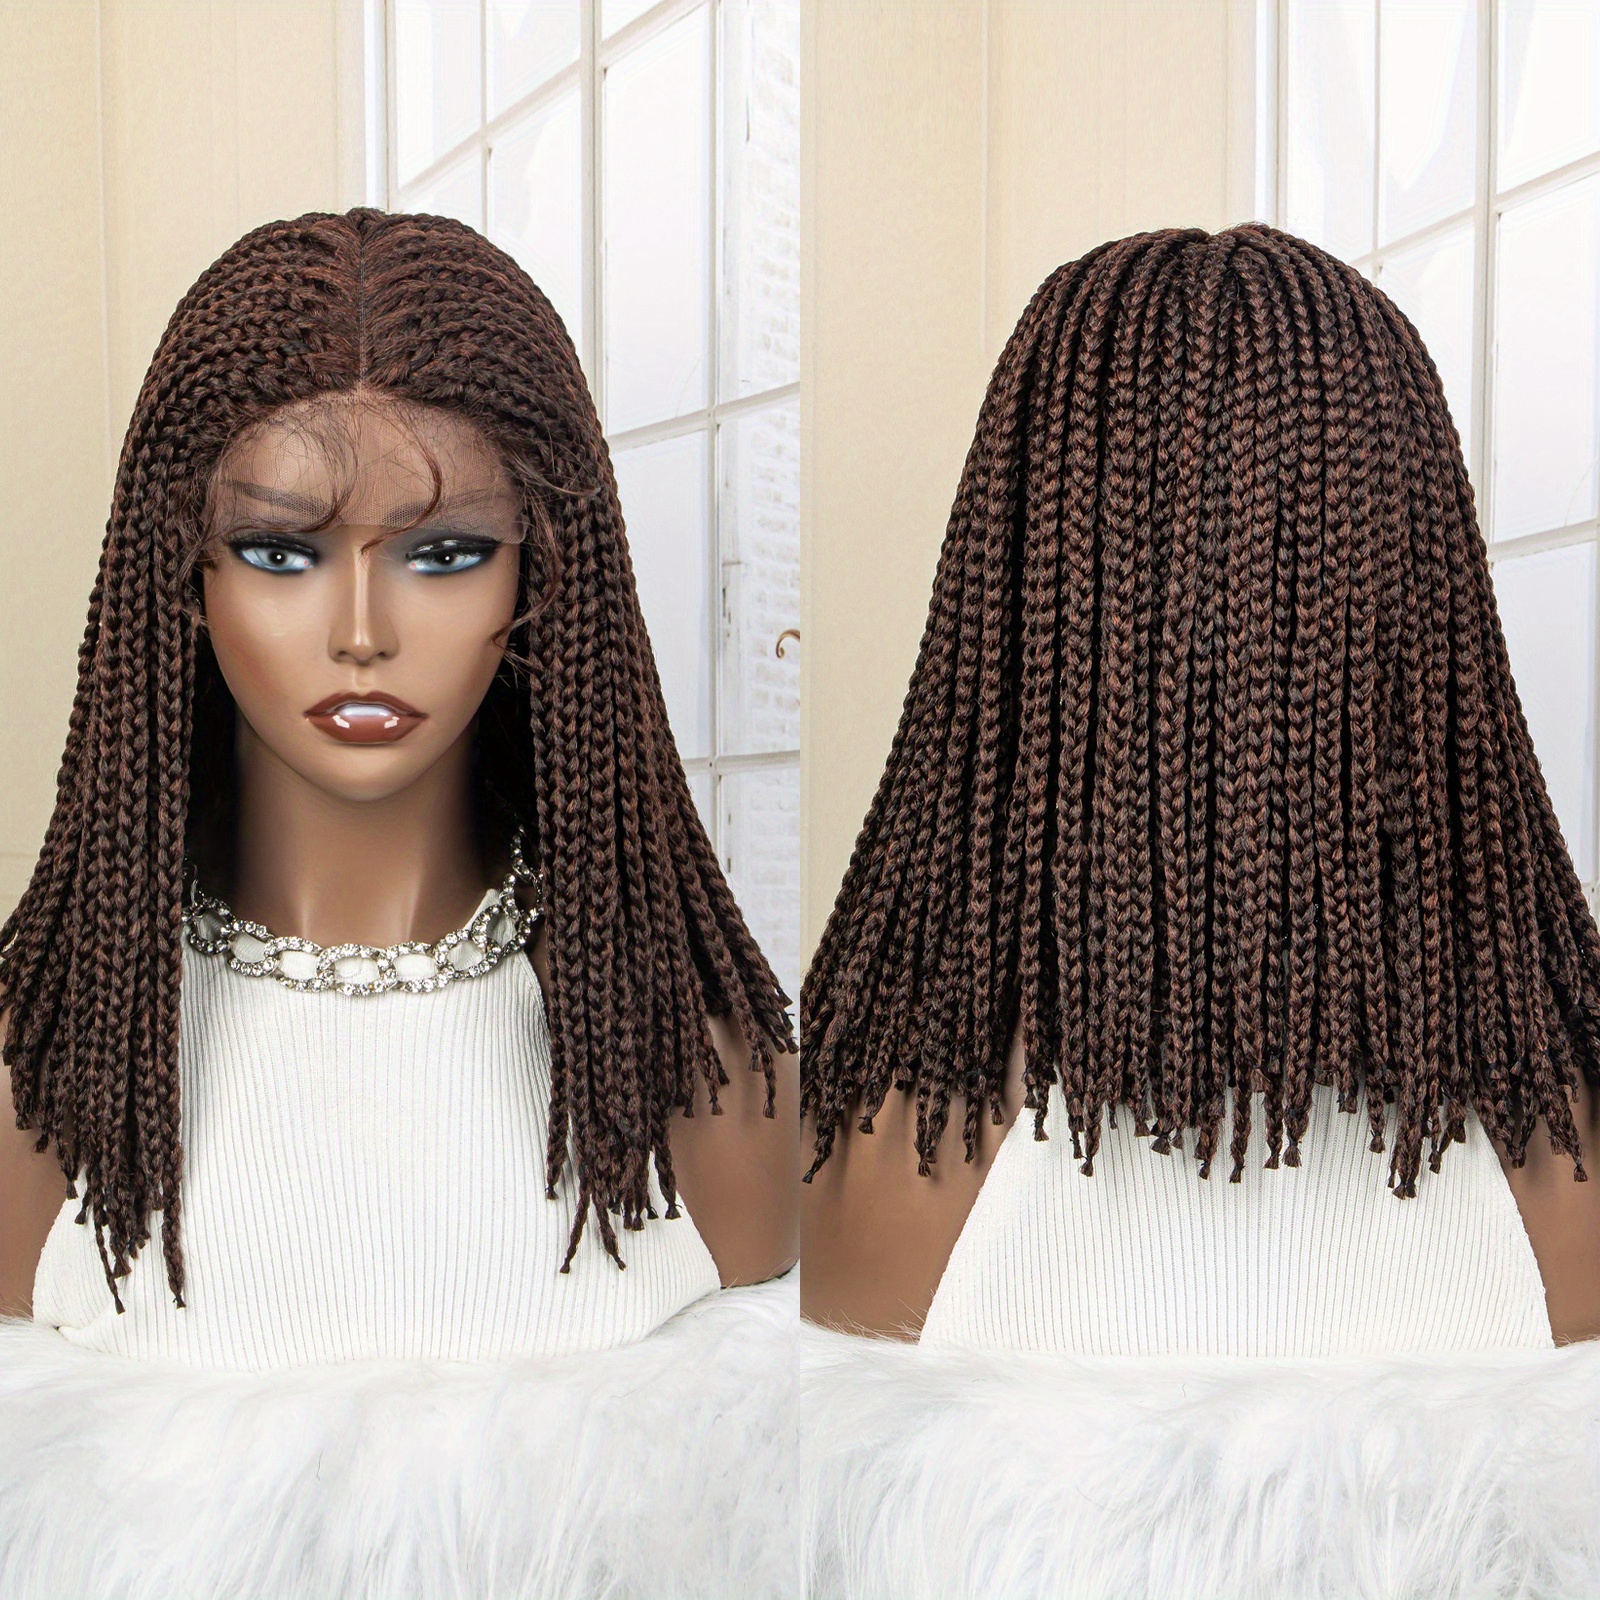 16Inch Box Braided Wigs Curly Ends Knotless Lace Front Braid Wig